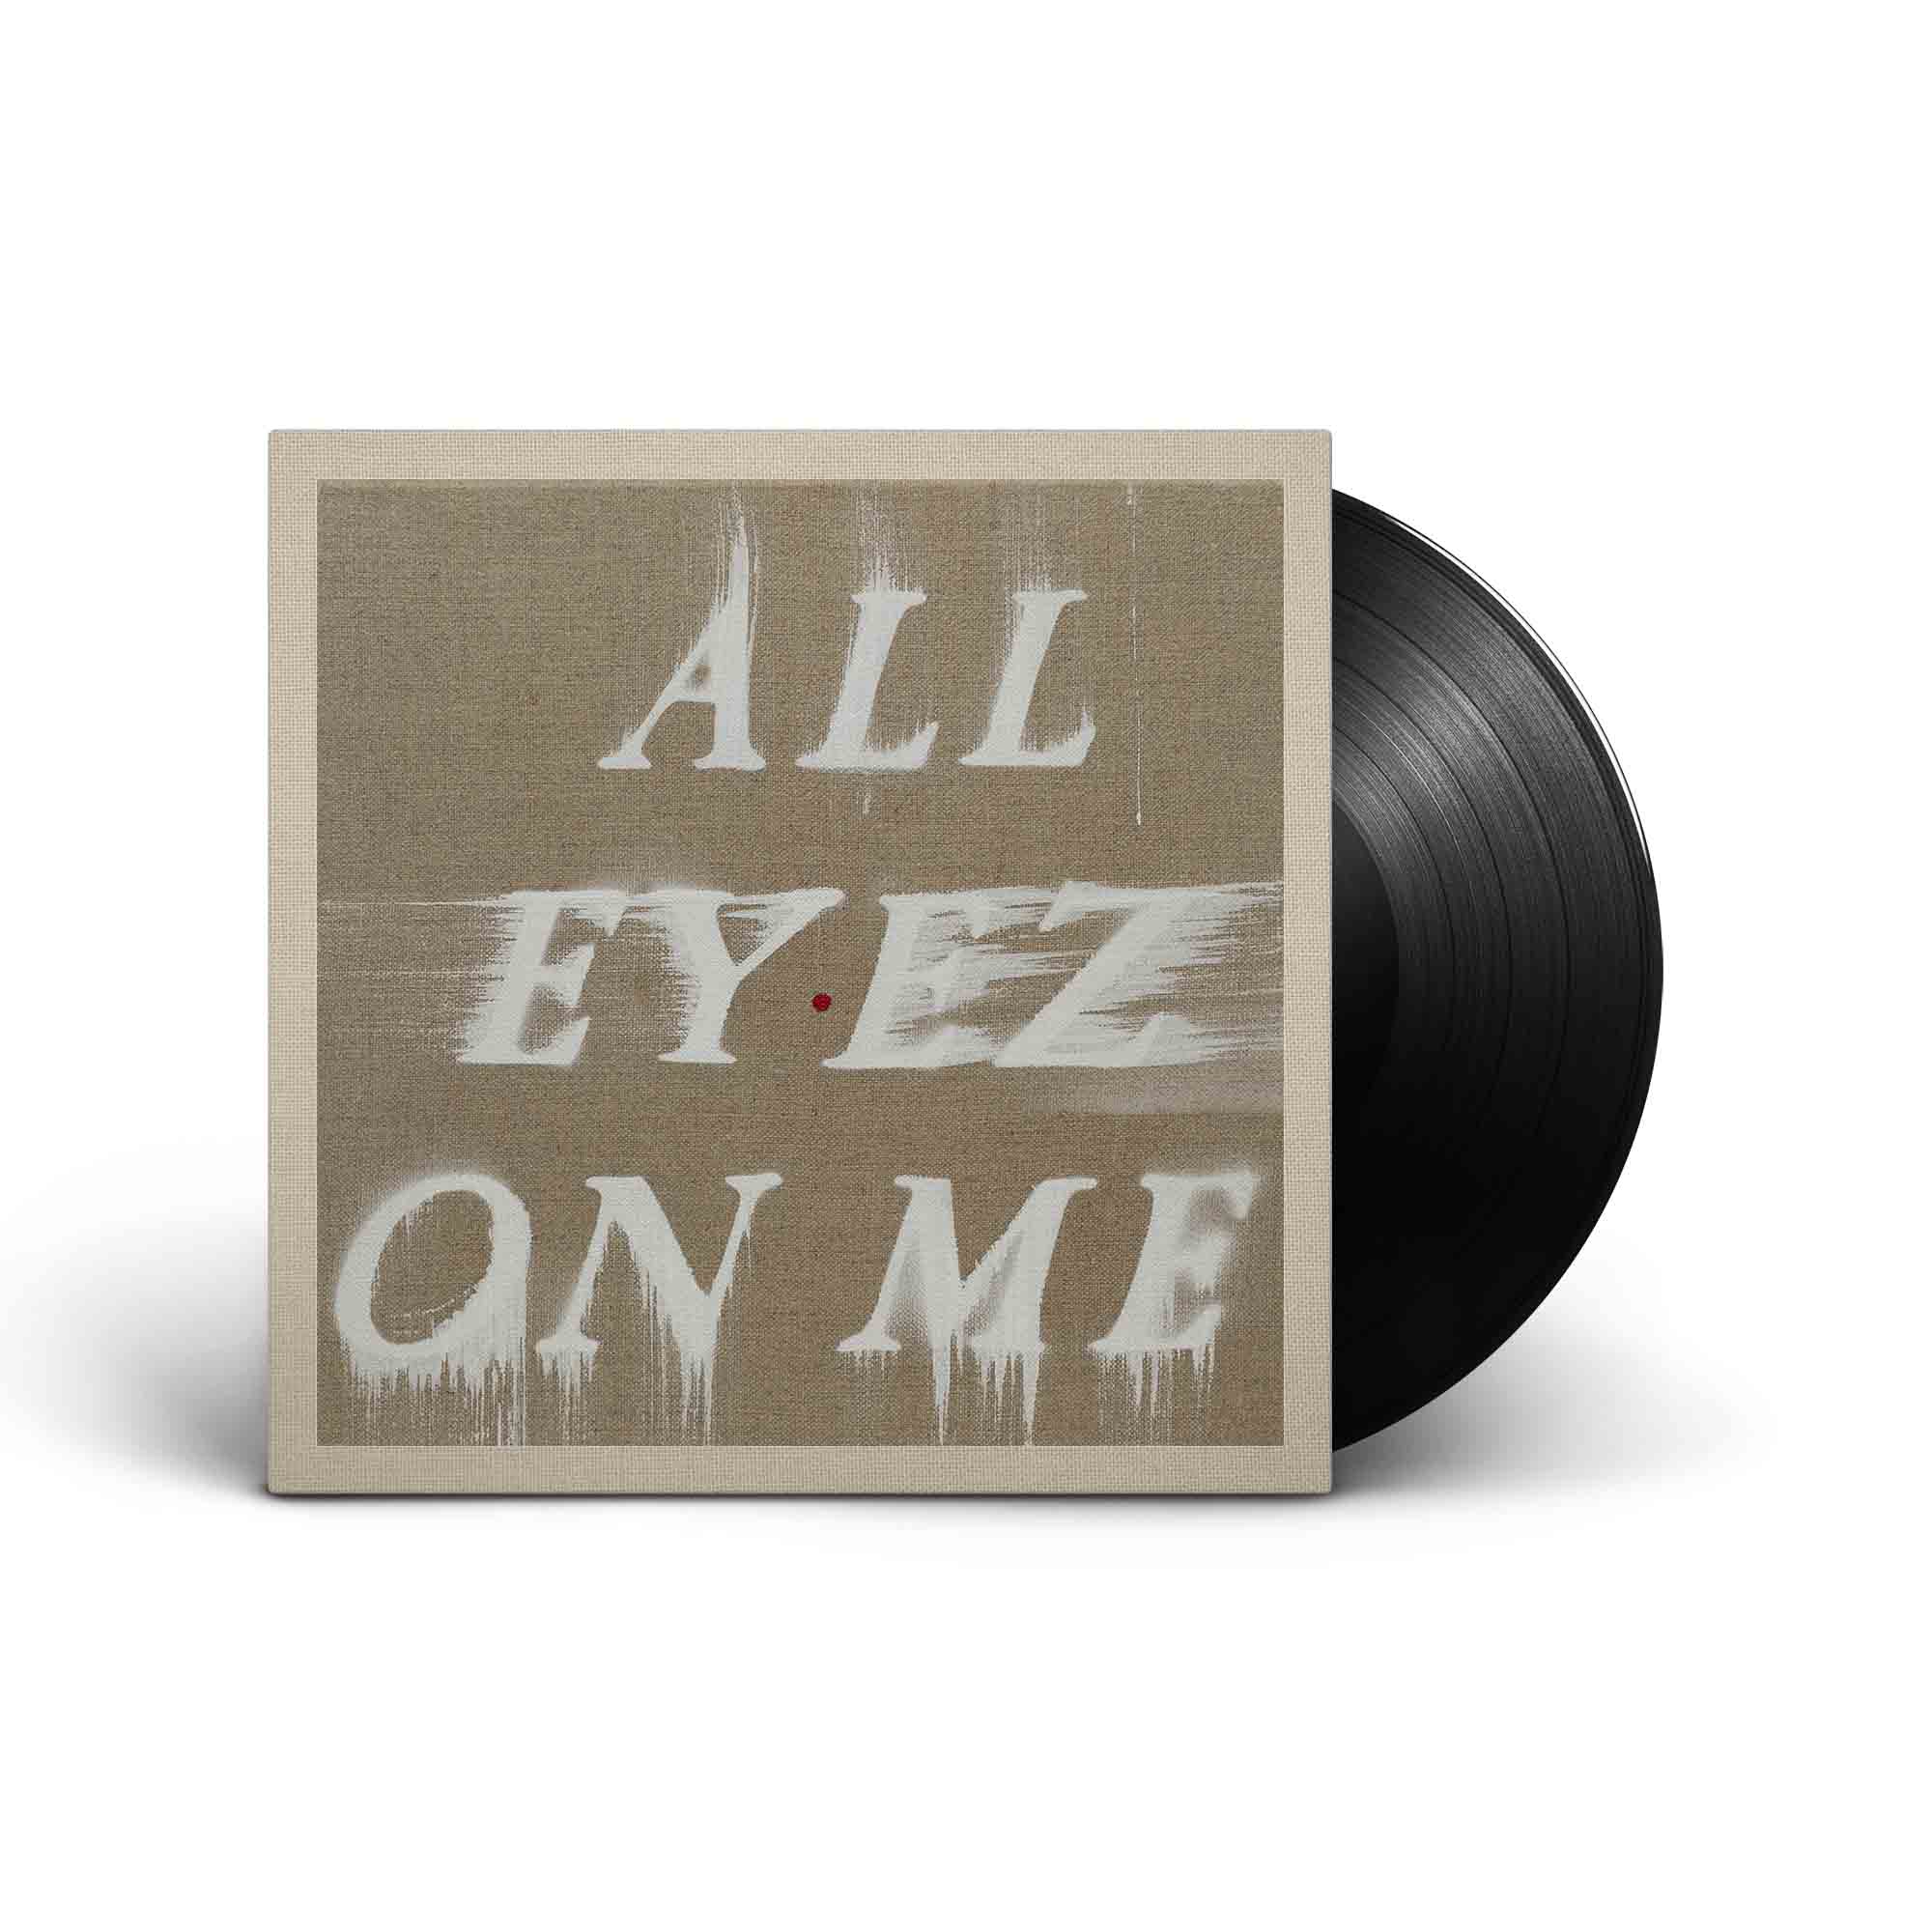 Interscope Records 2Pac - All Eyez On Me by Ed Ruscha Gallery Vinyl Record  (Signed, Edition of 100)